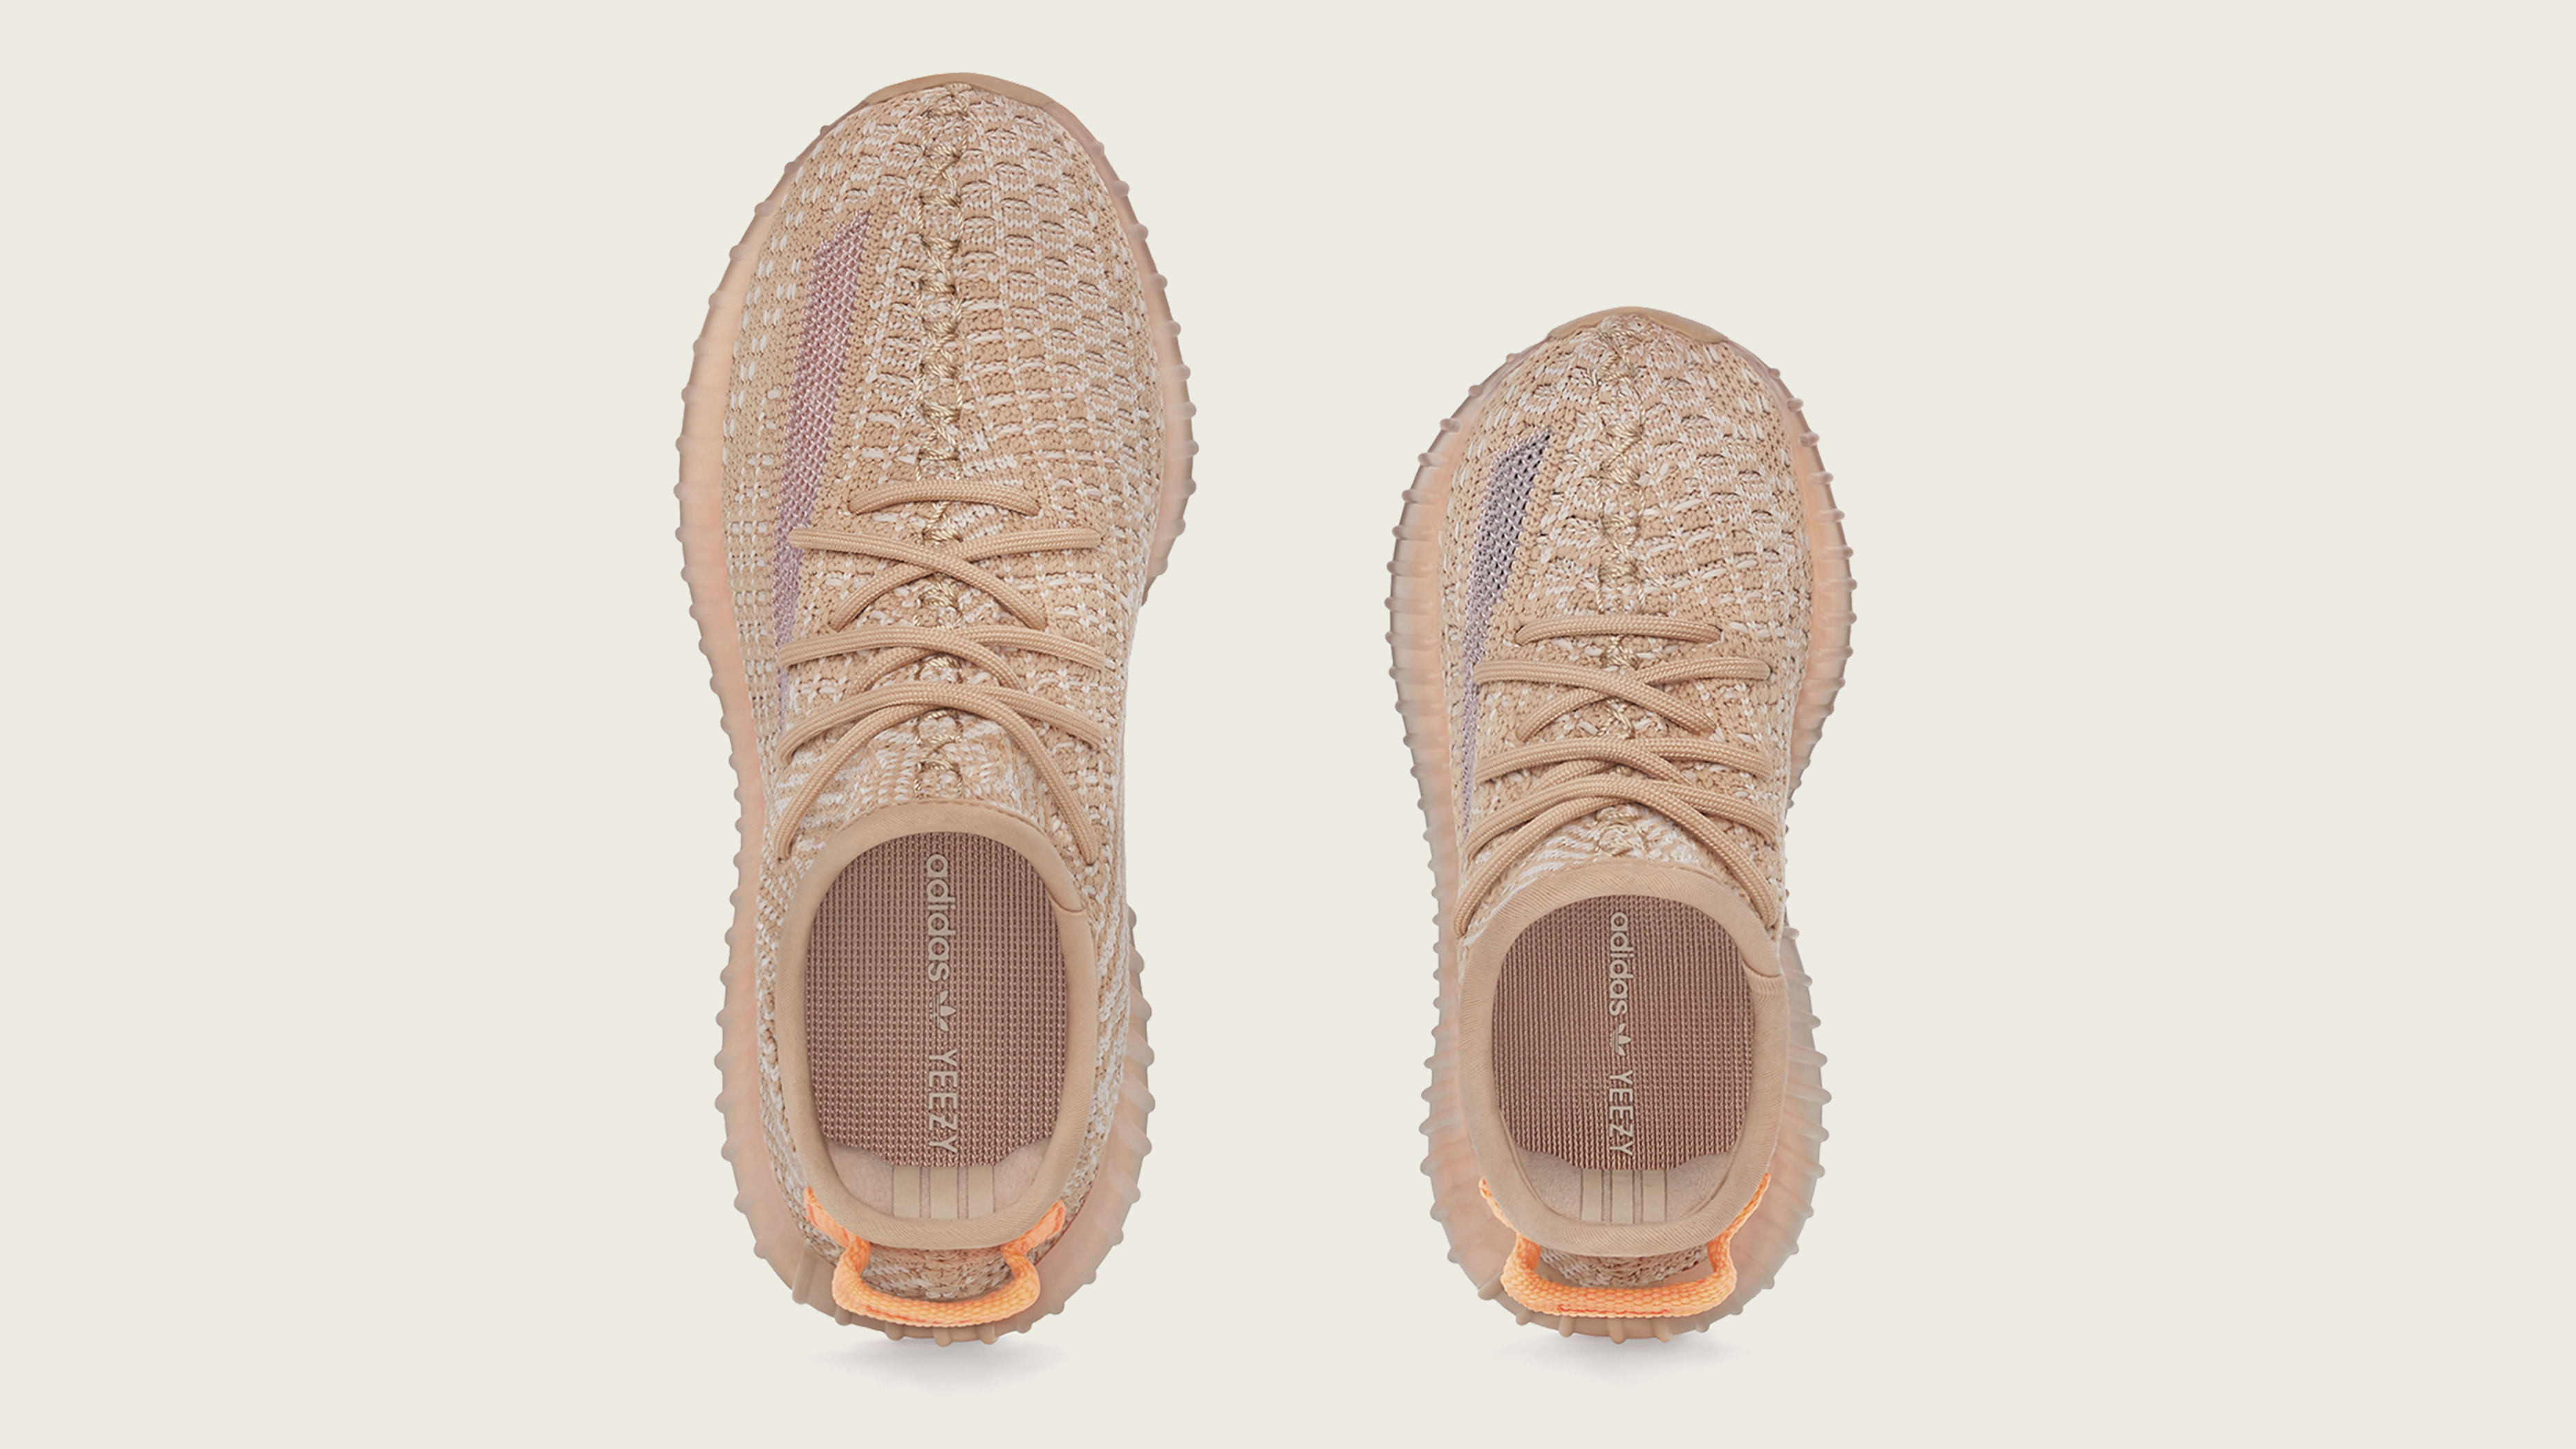 Clay' Yeezy Boost 350 V2s | Complex